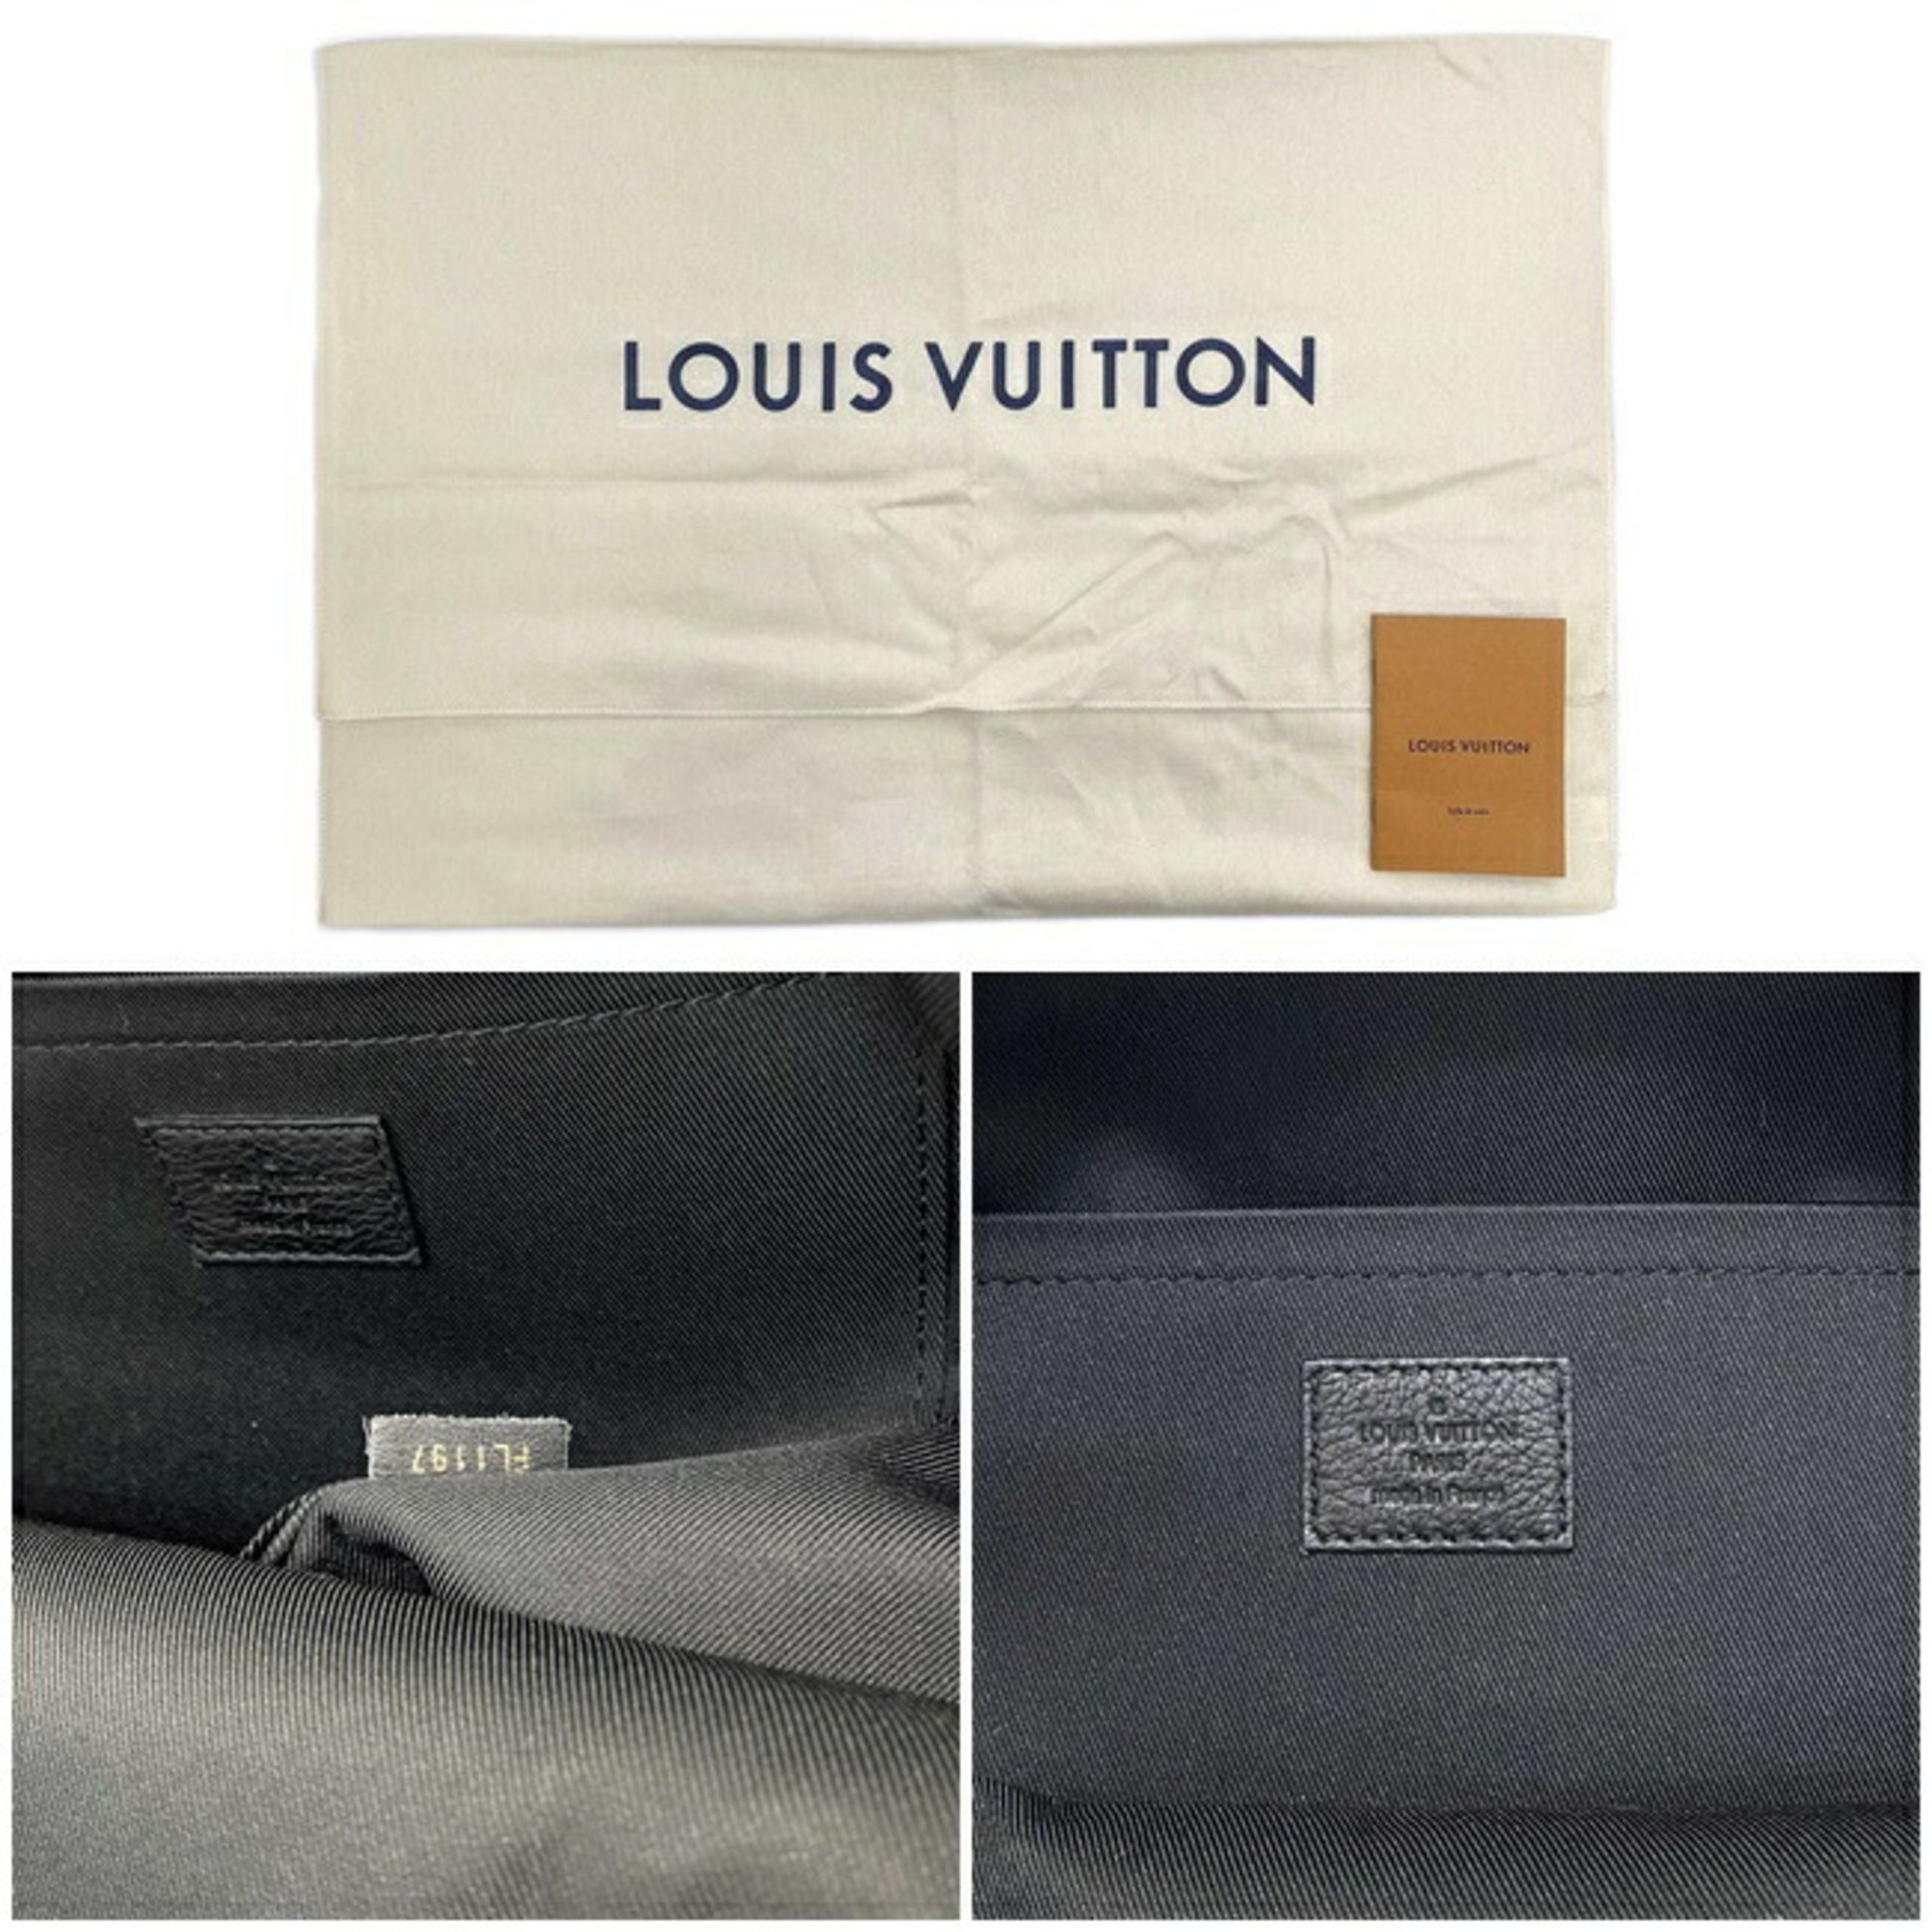 Sticker question- Is the sticker on the dust bag normal? : r/Louisvuitton